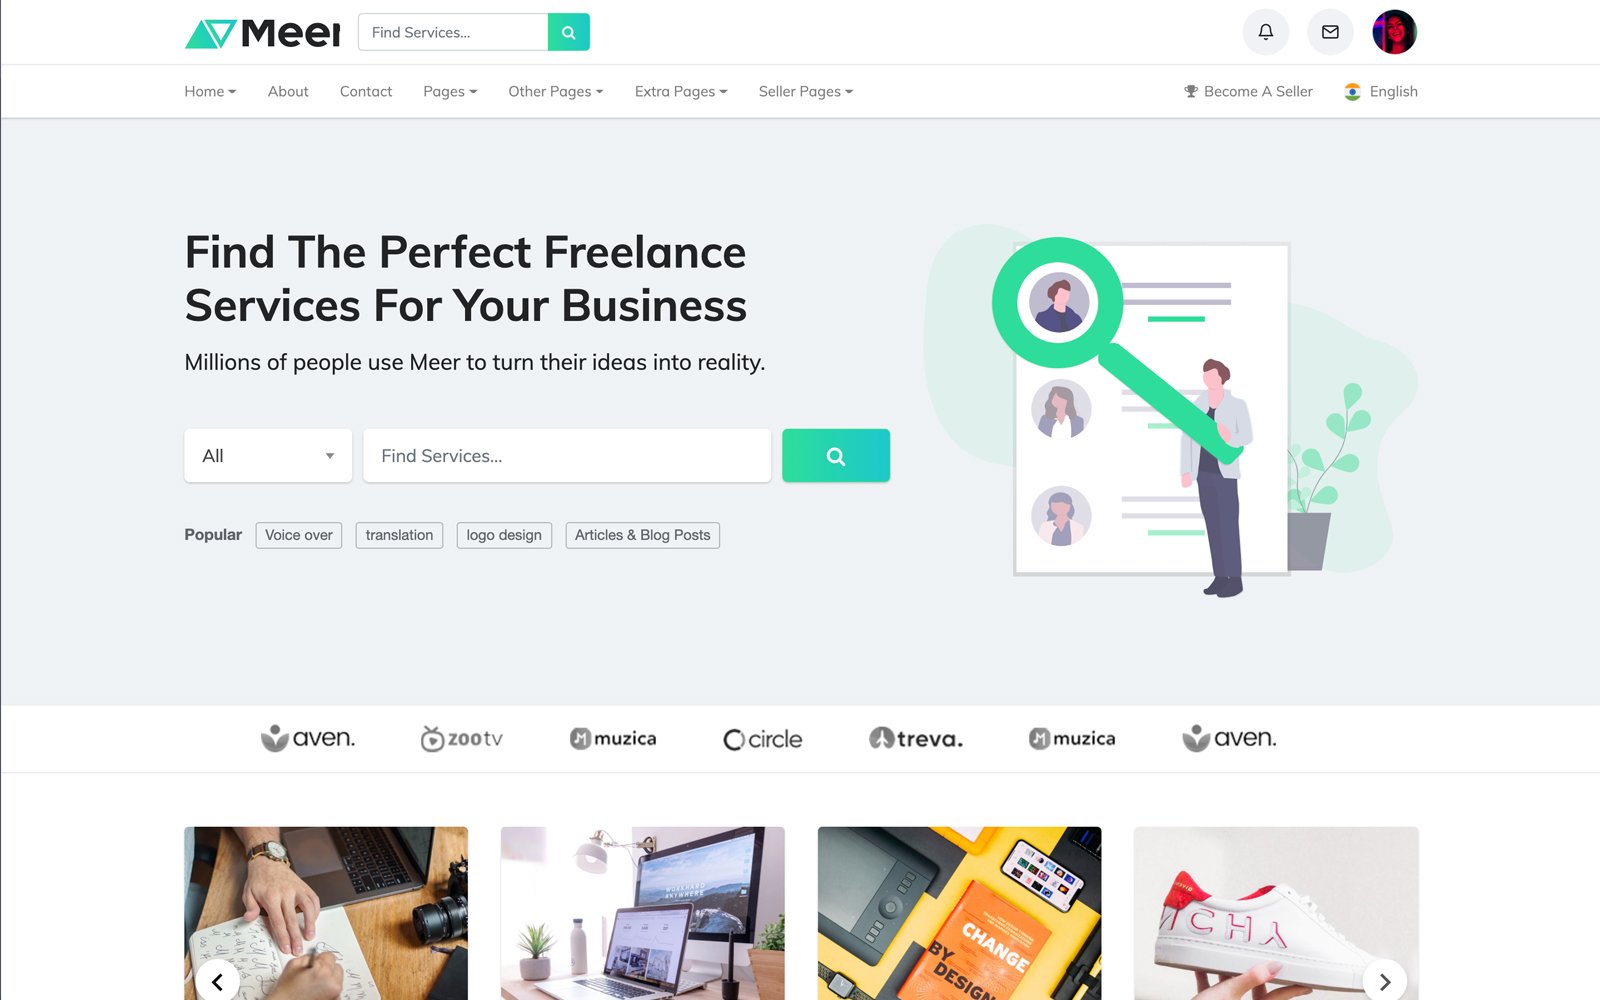 Meer- LMS & Freelance Services Marketplace for Businesses HTML Website Template